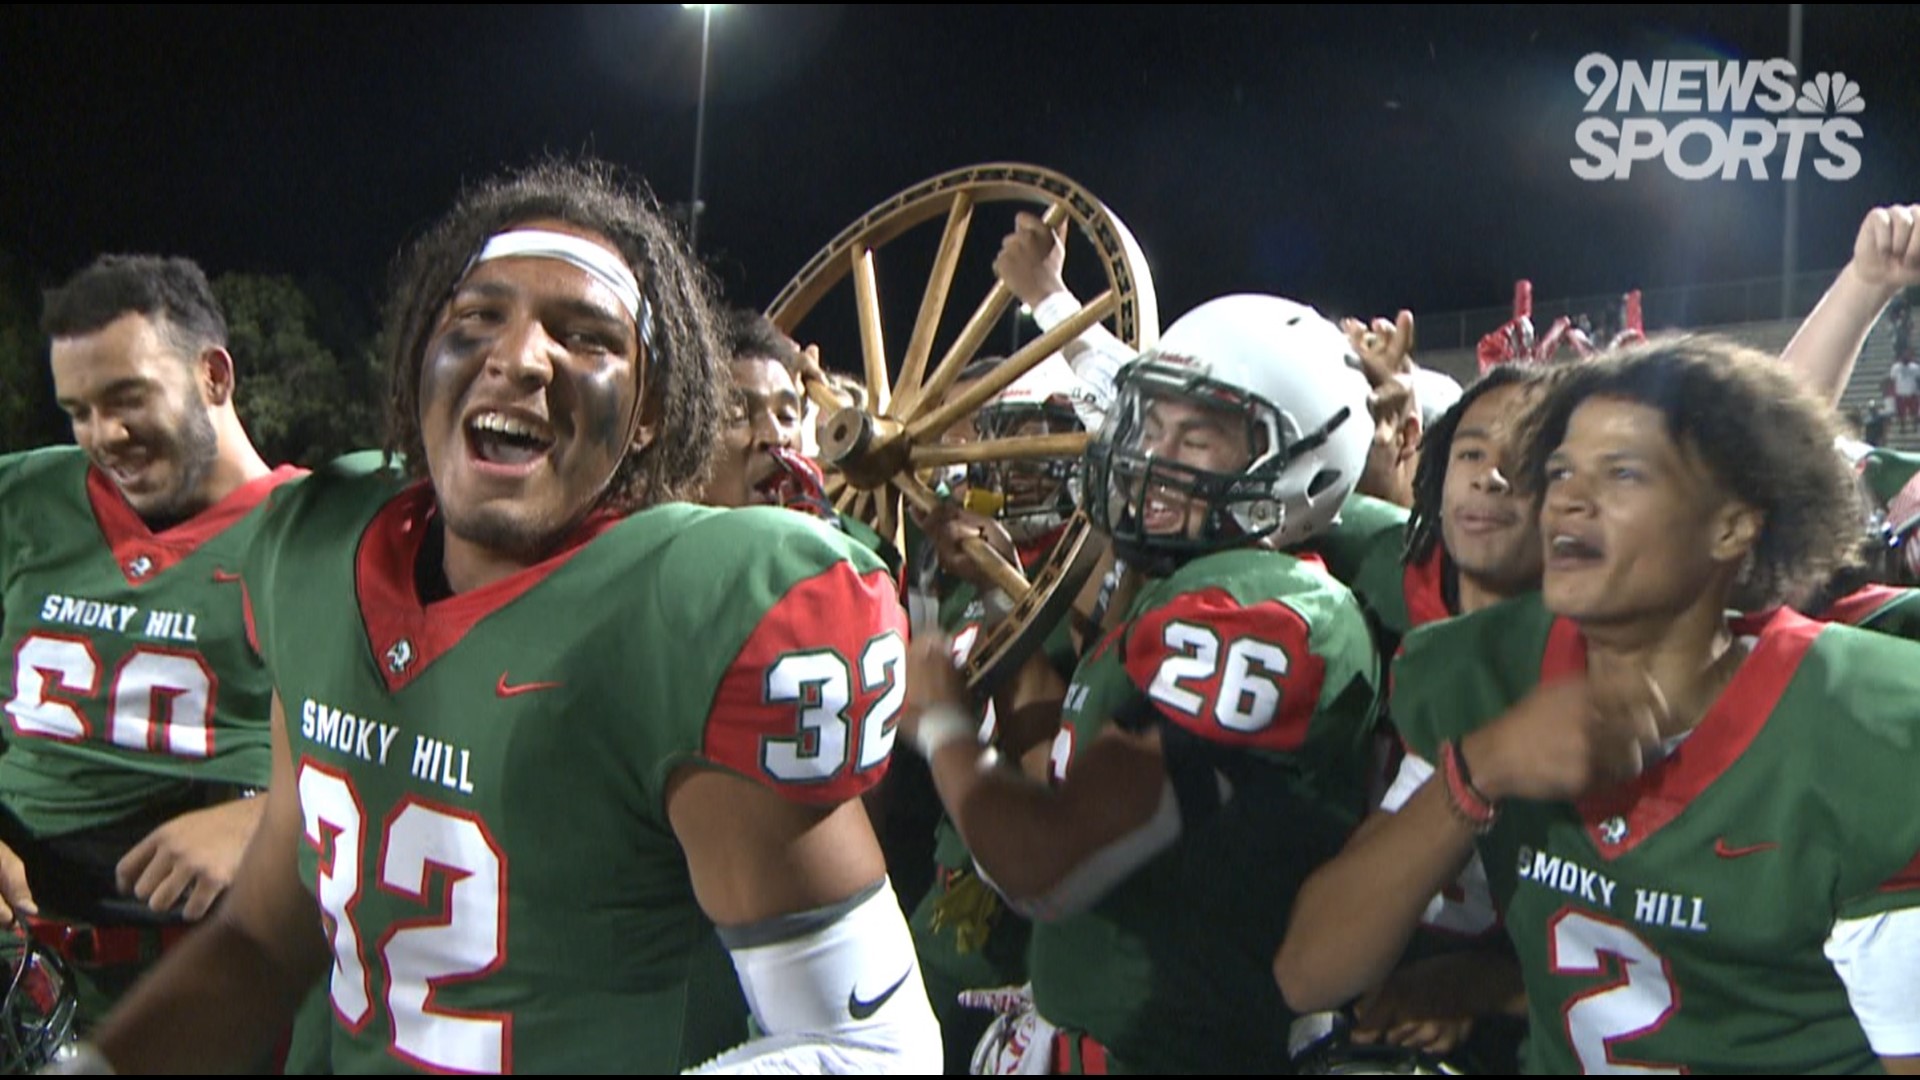 The Buffaloes rolled past the Trailblazers 47-8 on Friday night to keep the rivalry trophy.